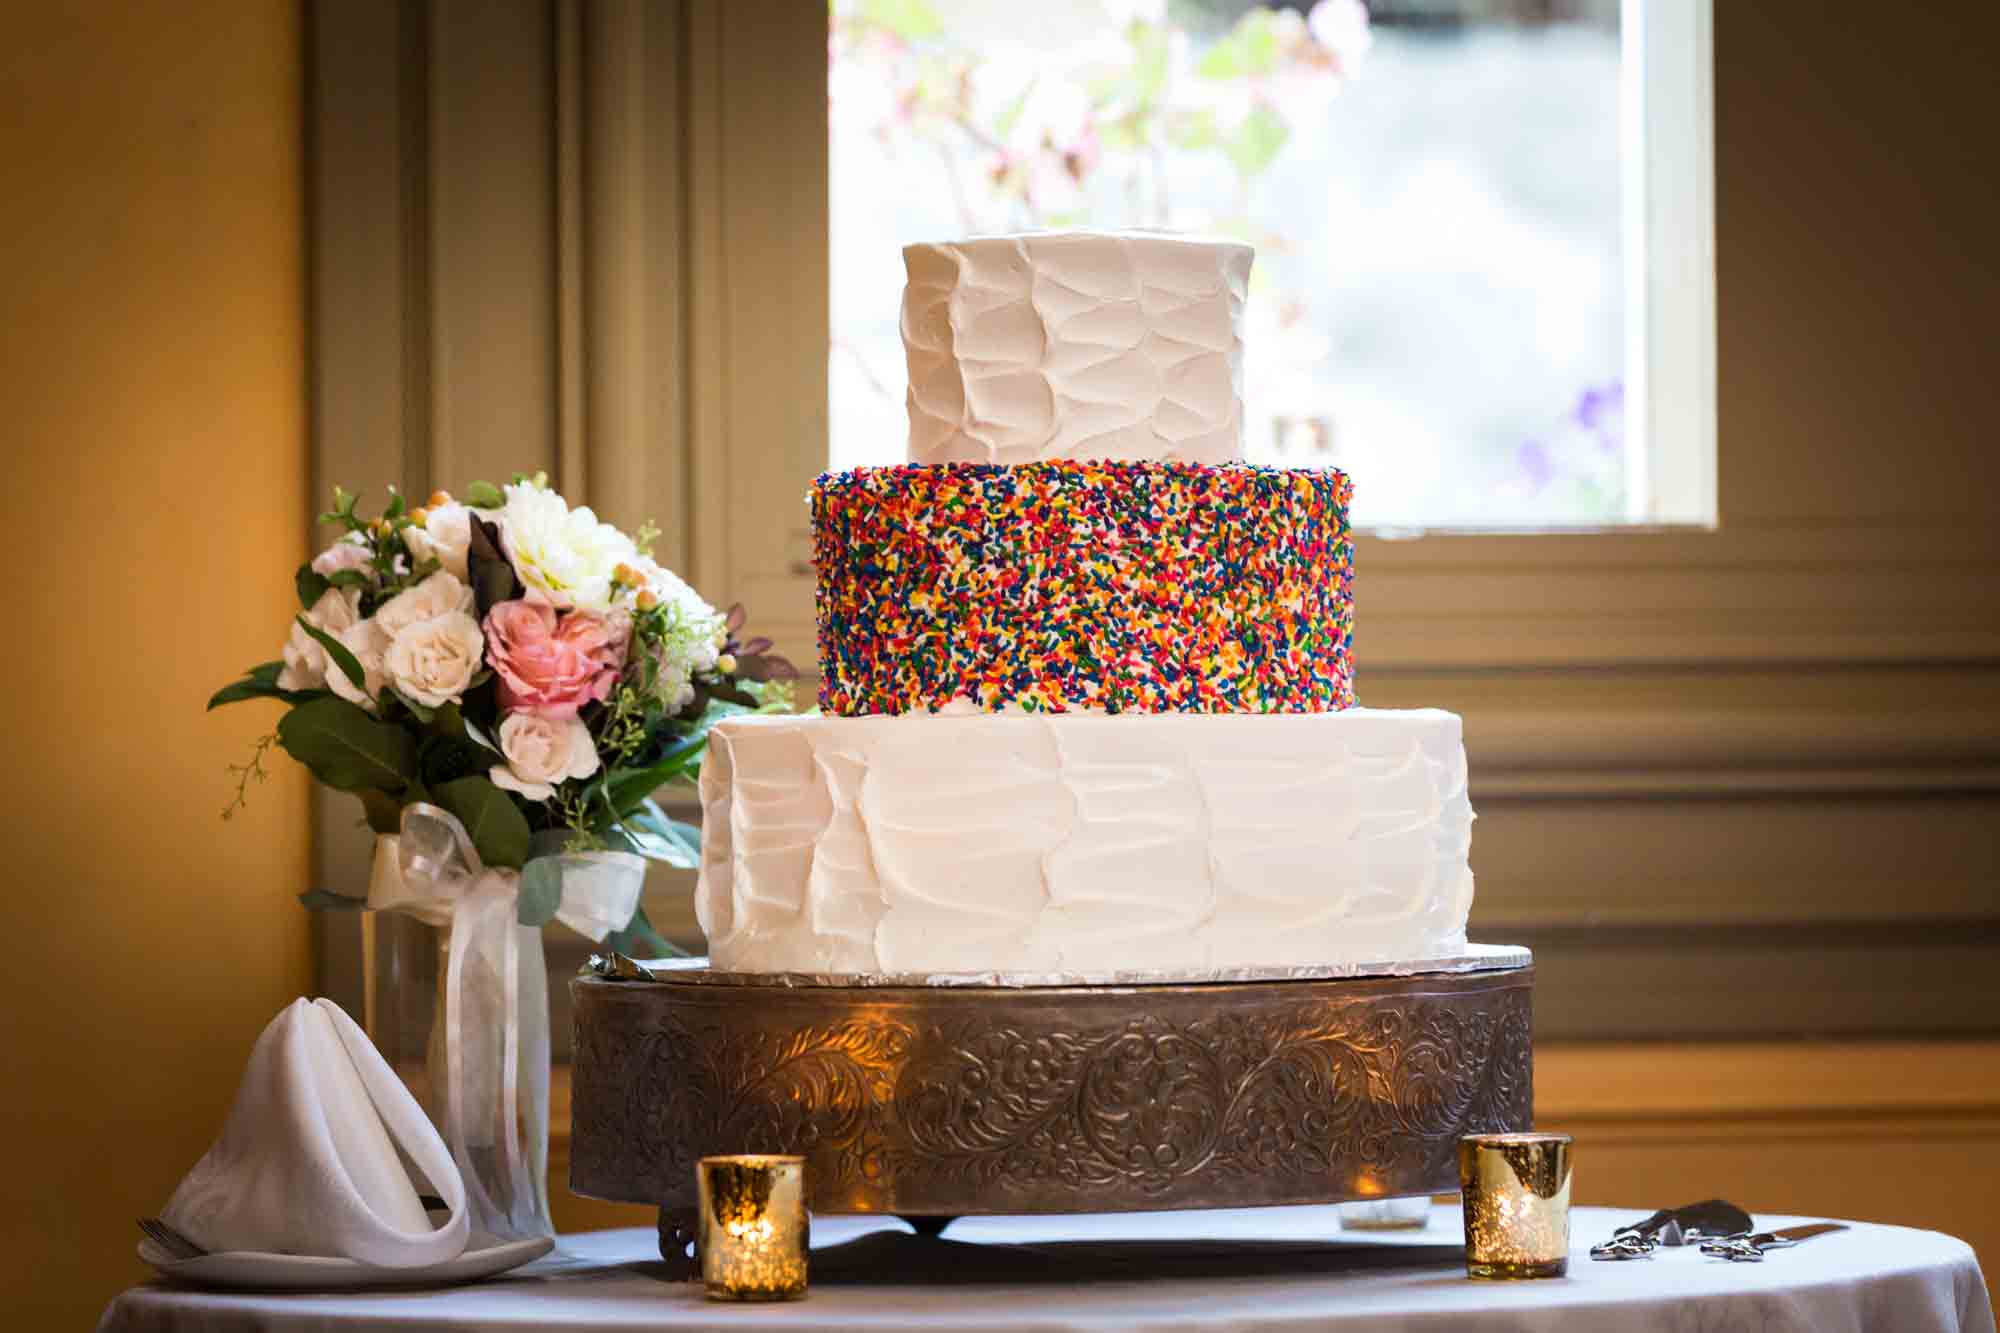 Wedding cake with layer covered in colorful sprinkles